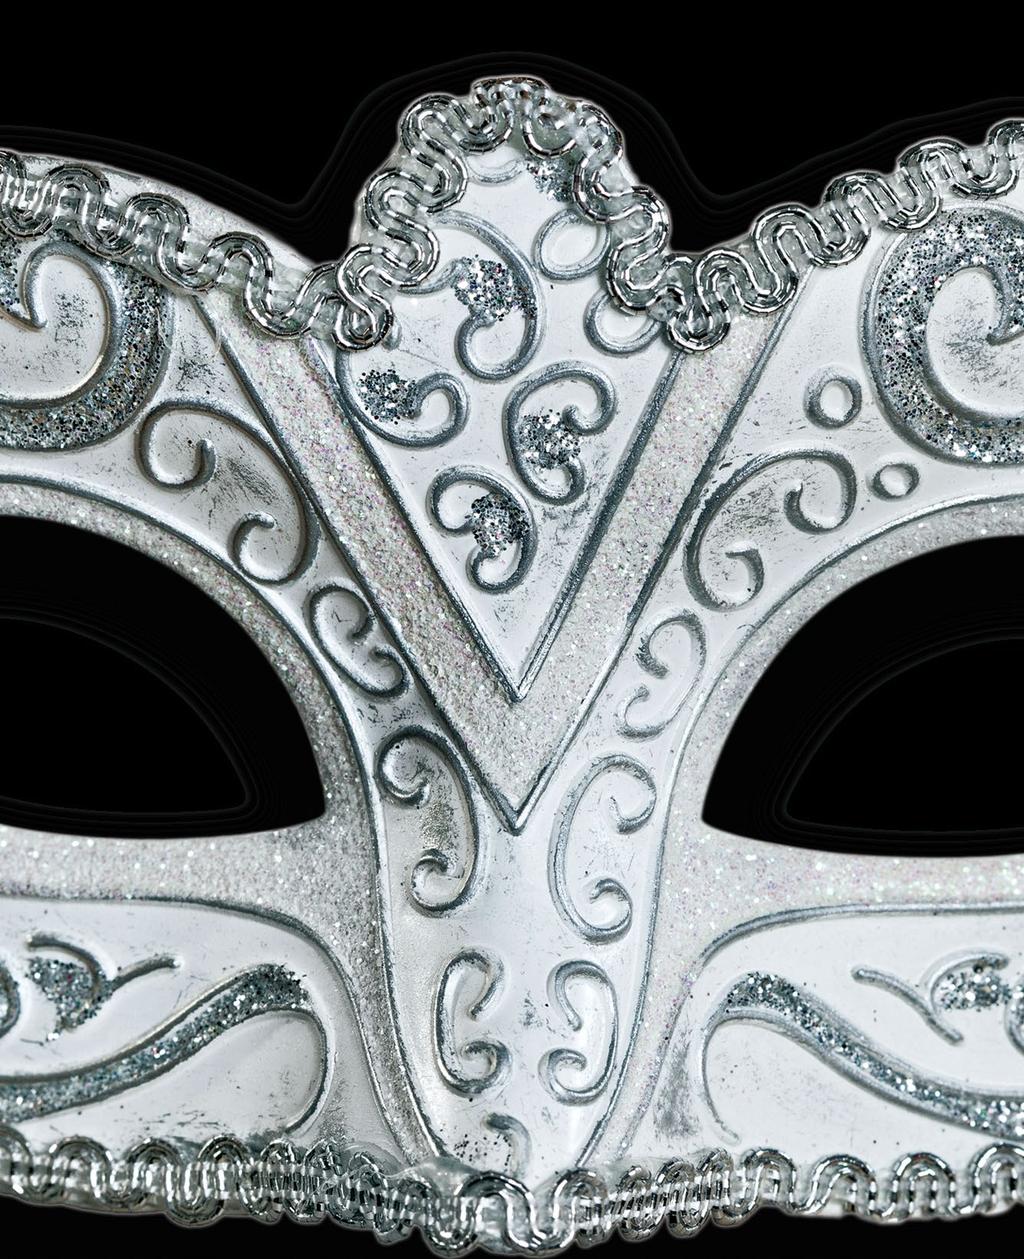 m i l w a u k e e 2 0 1 7 ABOUT THE UNCF MAYOR S MASKED BALL MILWAUKEE OVERVIEW The second UNCF Milwaukee Mayor s Masked Ball will be one of the must attend premier social events of the year.